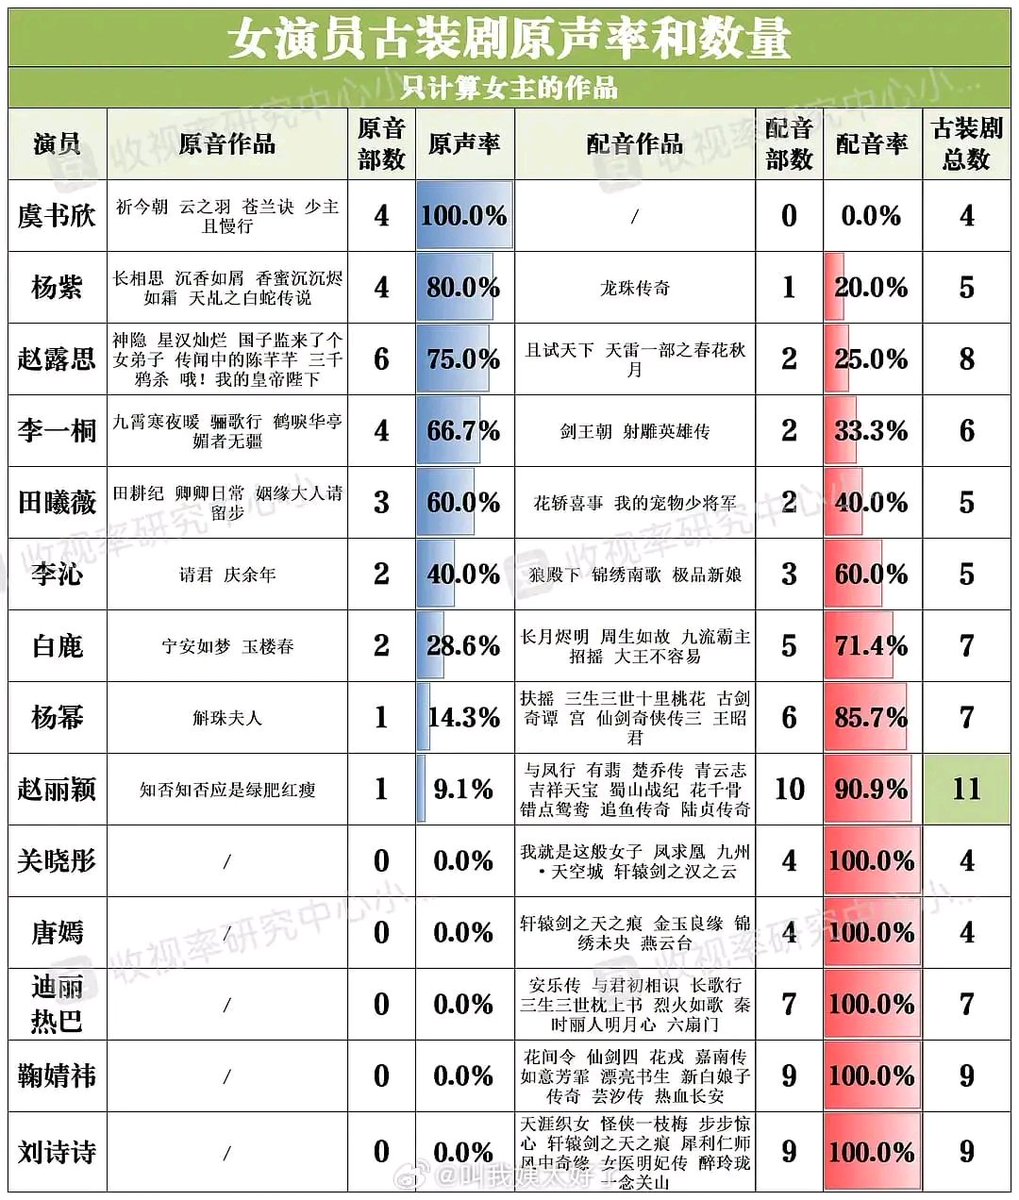 According to statistics on the number and original voice rate of actress costume dramas, the Top4.
1. #EstherYu
2. #ZhaoLusi
3. #YangZi
4. #LiYitong